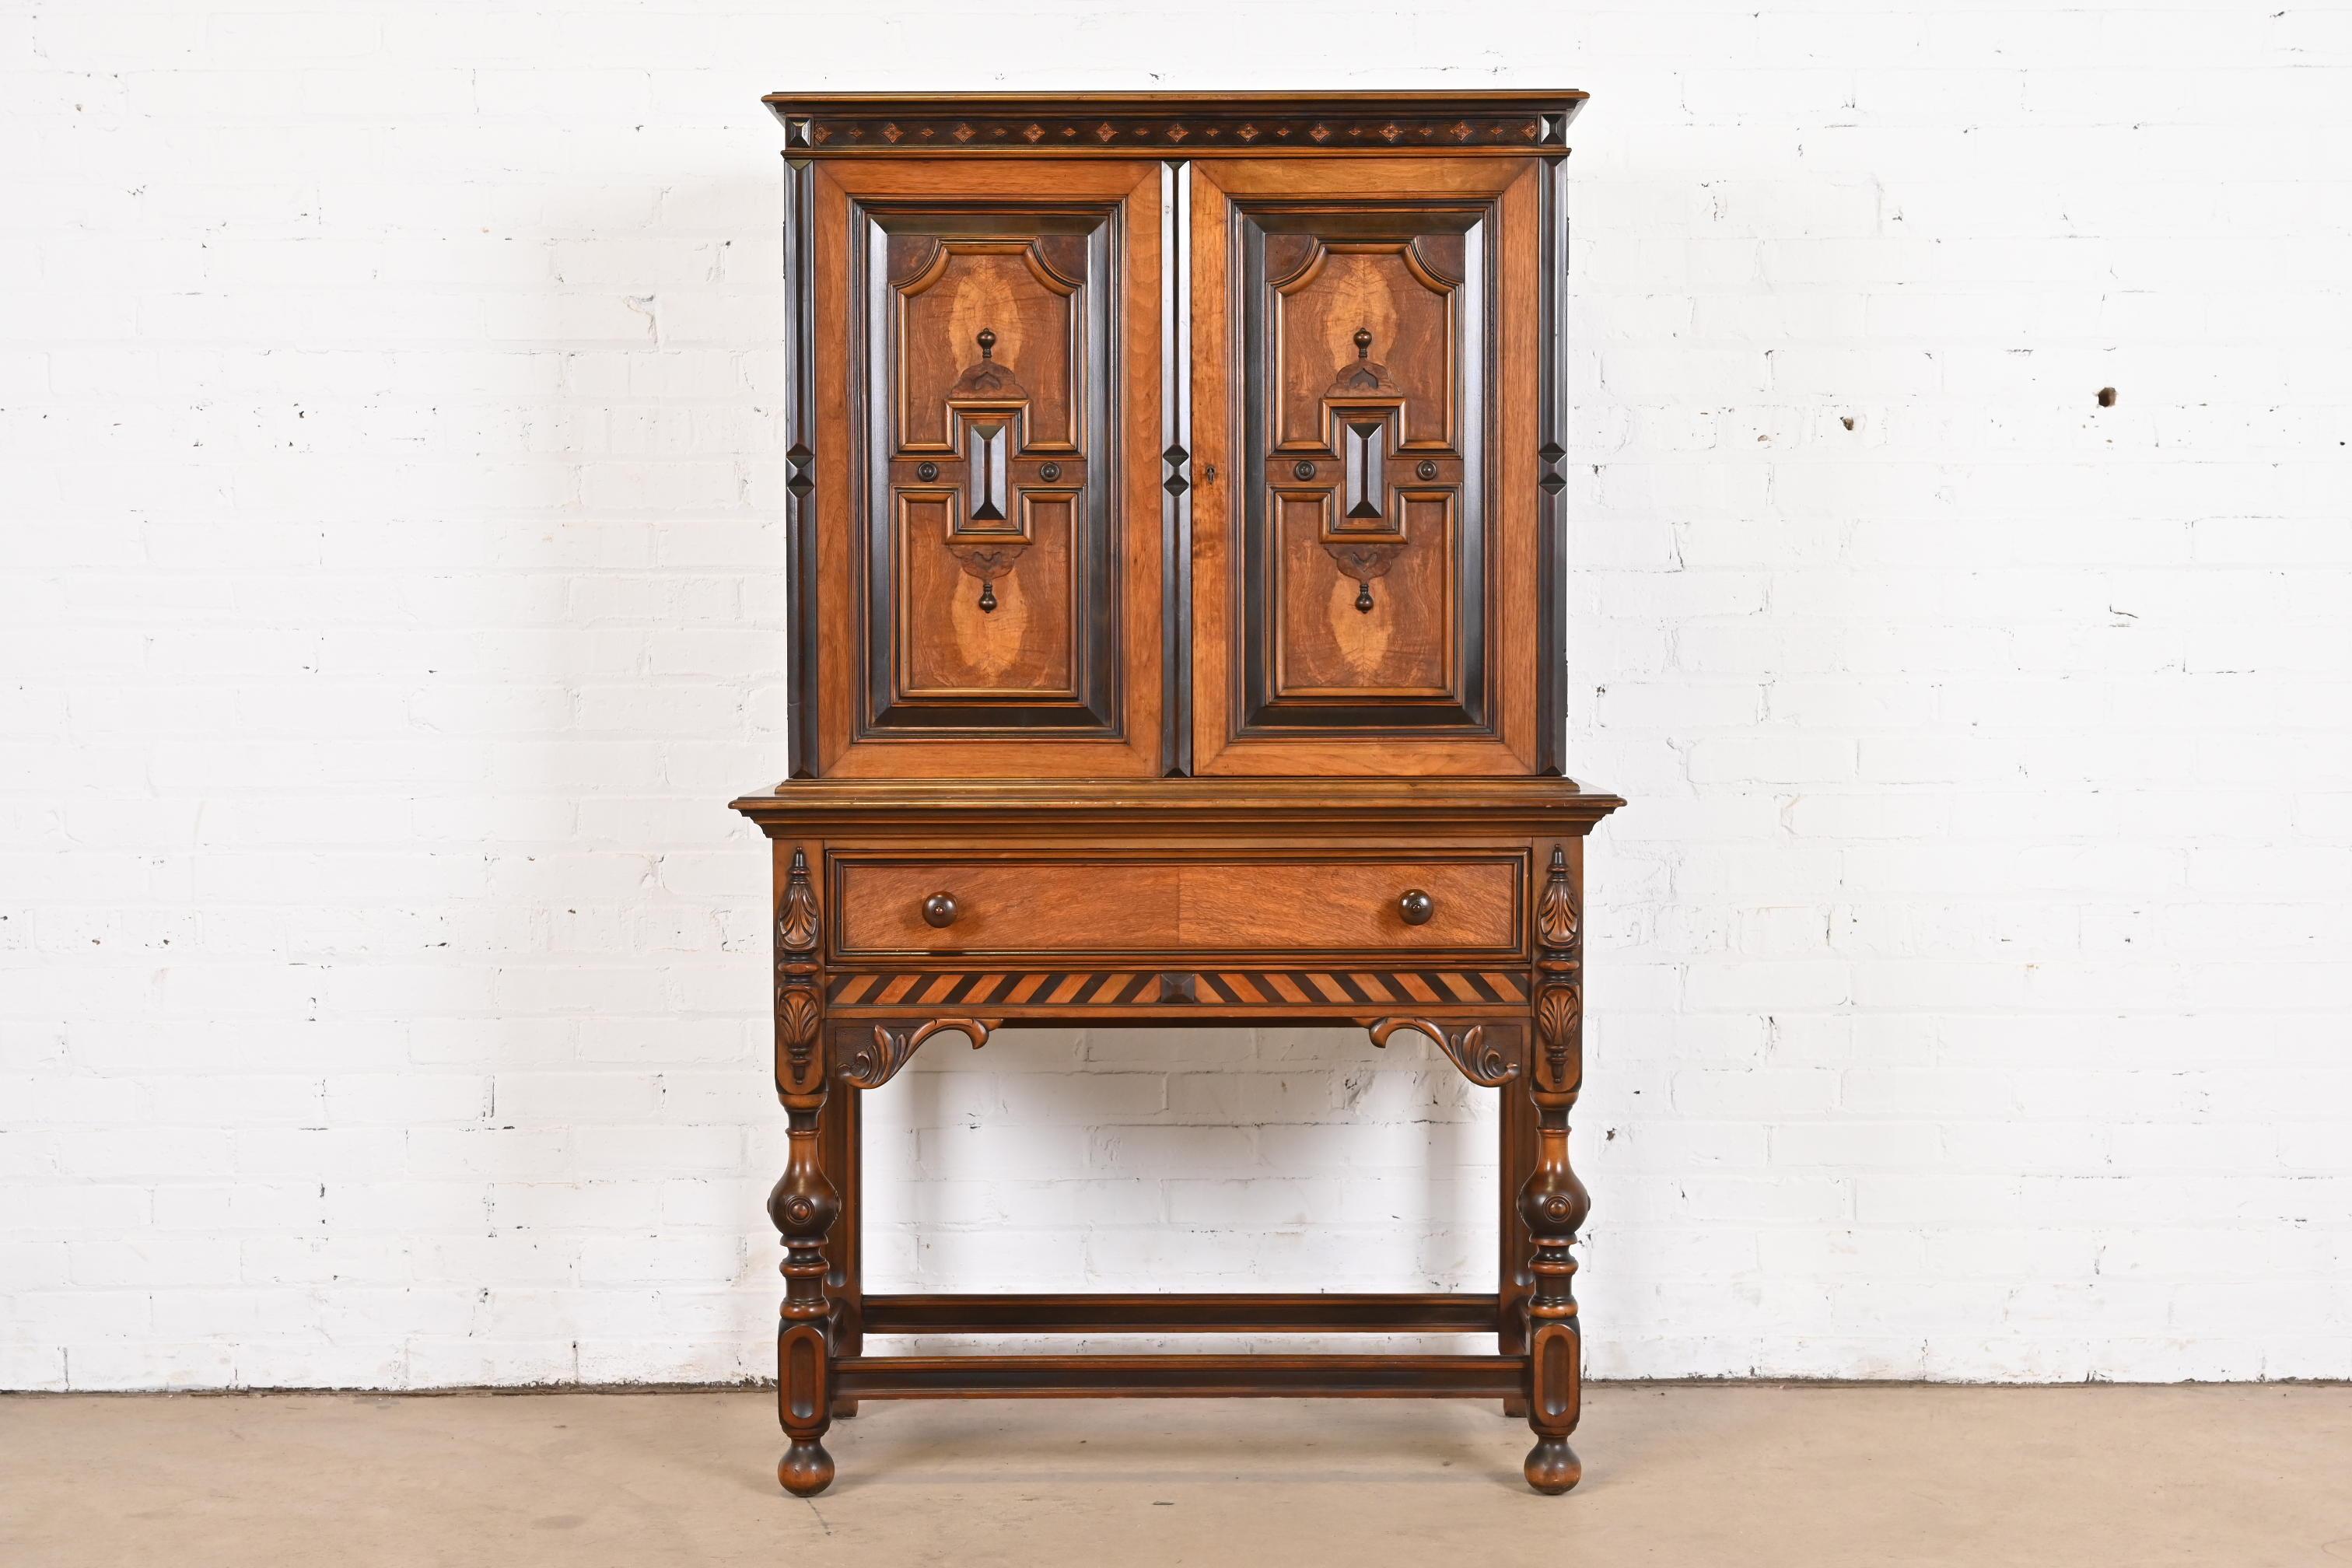 An exceptional English Jacobean style bookcase, china hutch, or bar cabinet

By Berkey & Gay

USA, Circa 1920s

Ornate carved walnut, with inlaid burl wood front.

Measures: 38